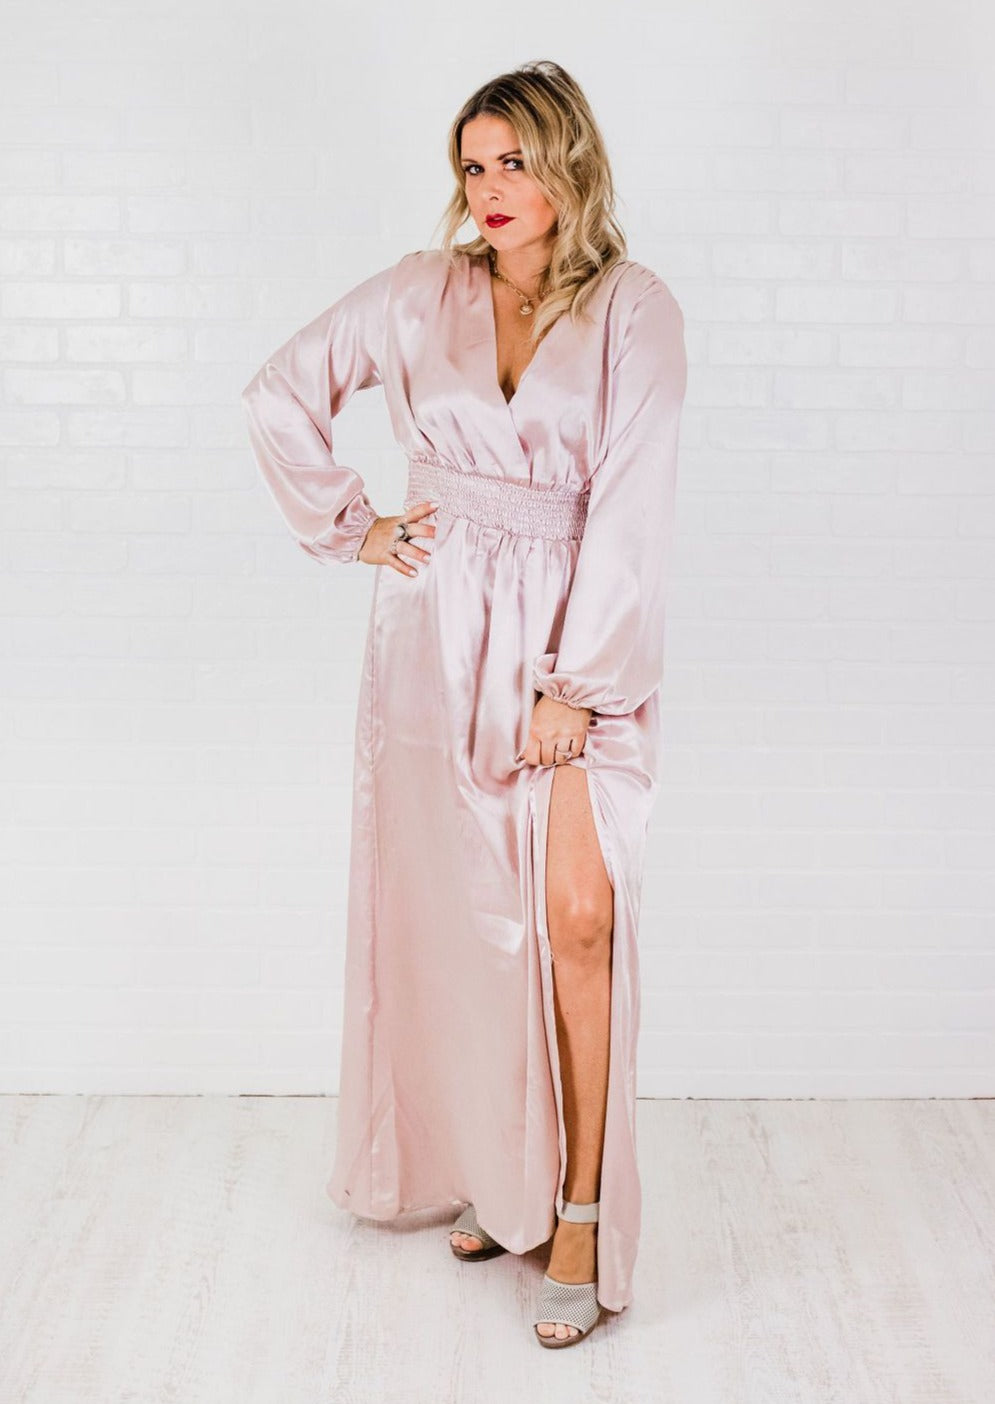 Our ‘Blush Champagne Dress’ is elegant and classy. We love the way the fabric flows and drapes. This dress features a surpluses neckline and smocked waist. Chic styles for the modern woman.